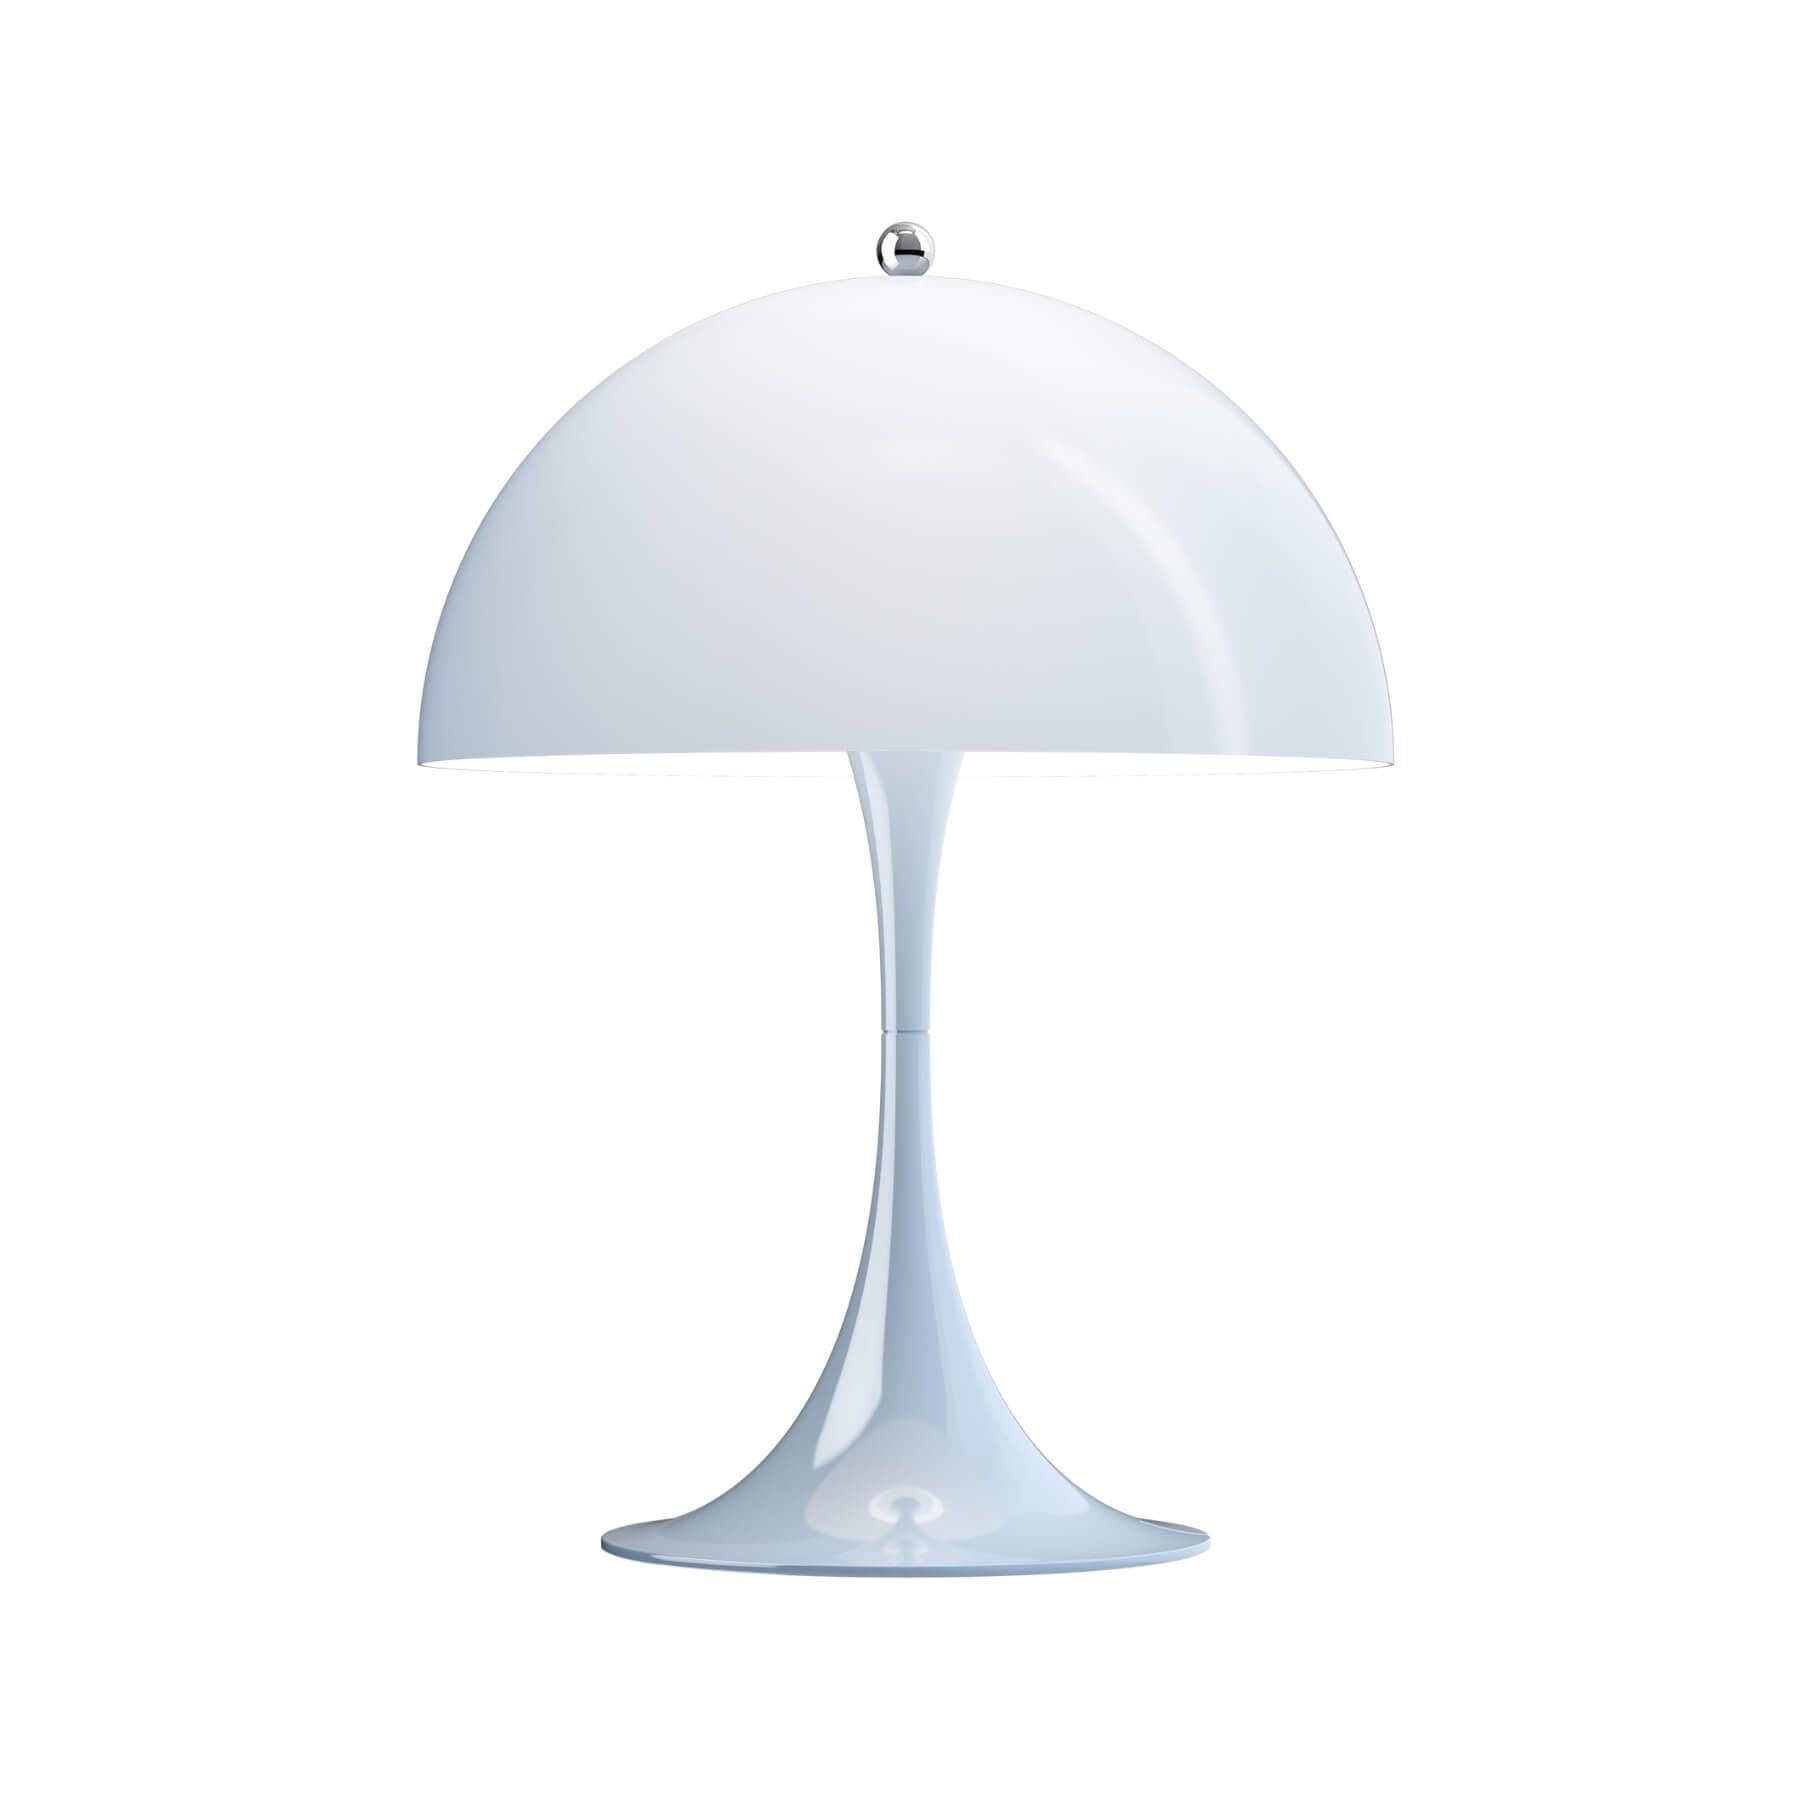 Louis Poulsen Panthella 250 Table Lamp Pale Blue Opal Acrylic Designer Lighting From Holloways Of Ludlow